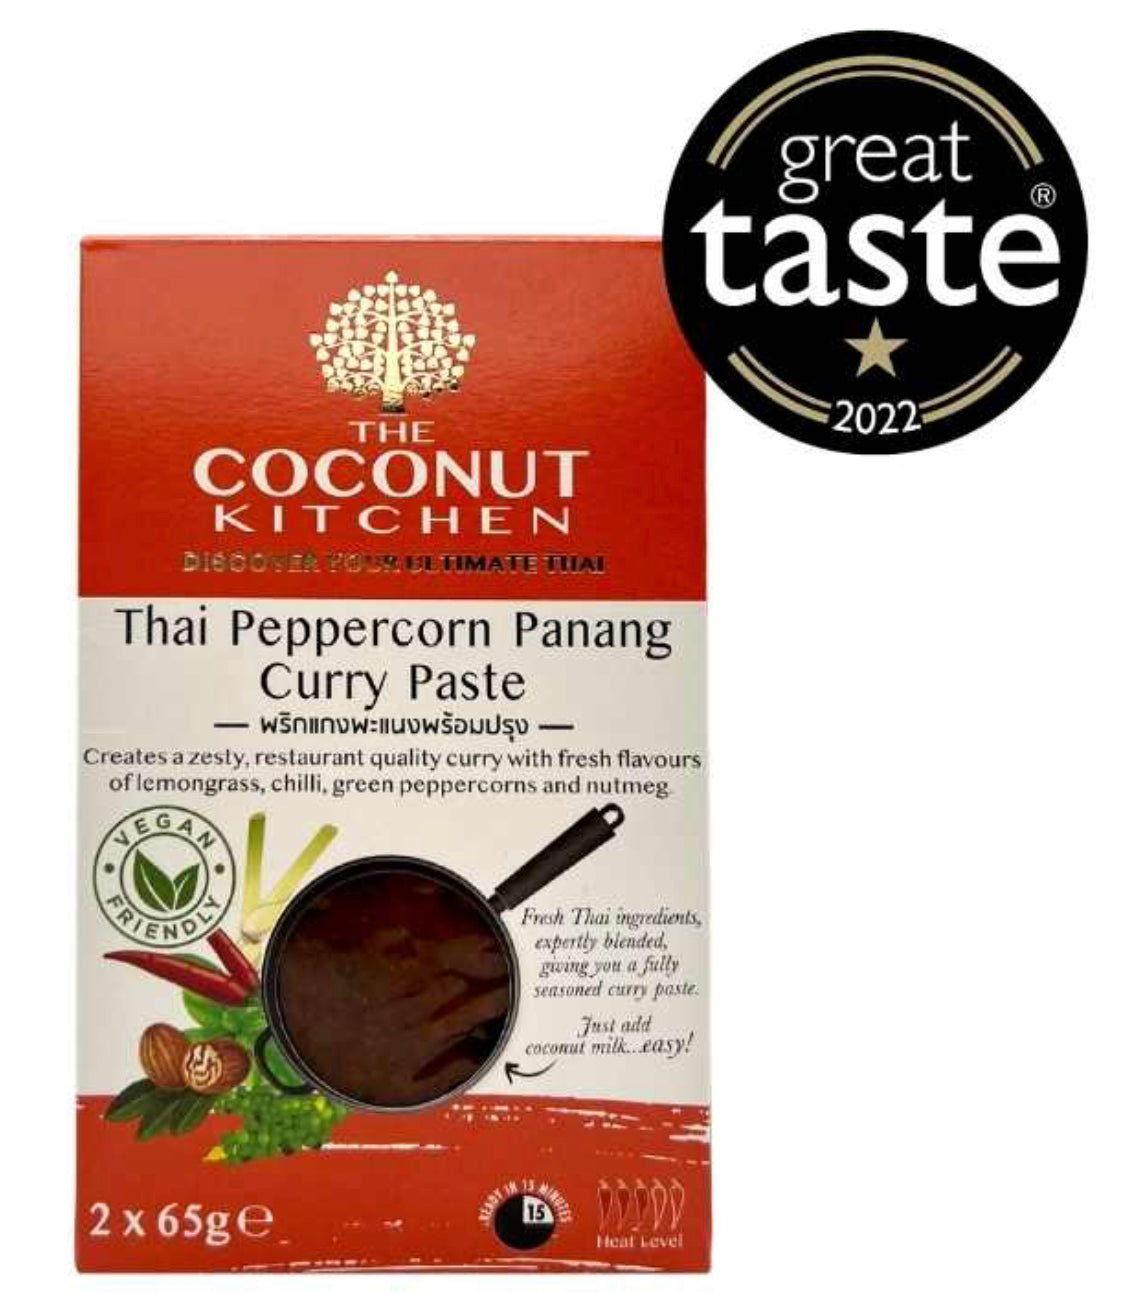 Coconut Kitchen - Thai Peppercorn Panang Curry Paste - 2 x 65g